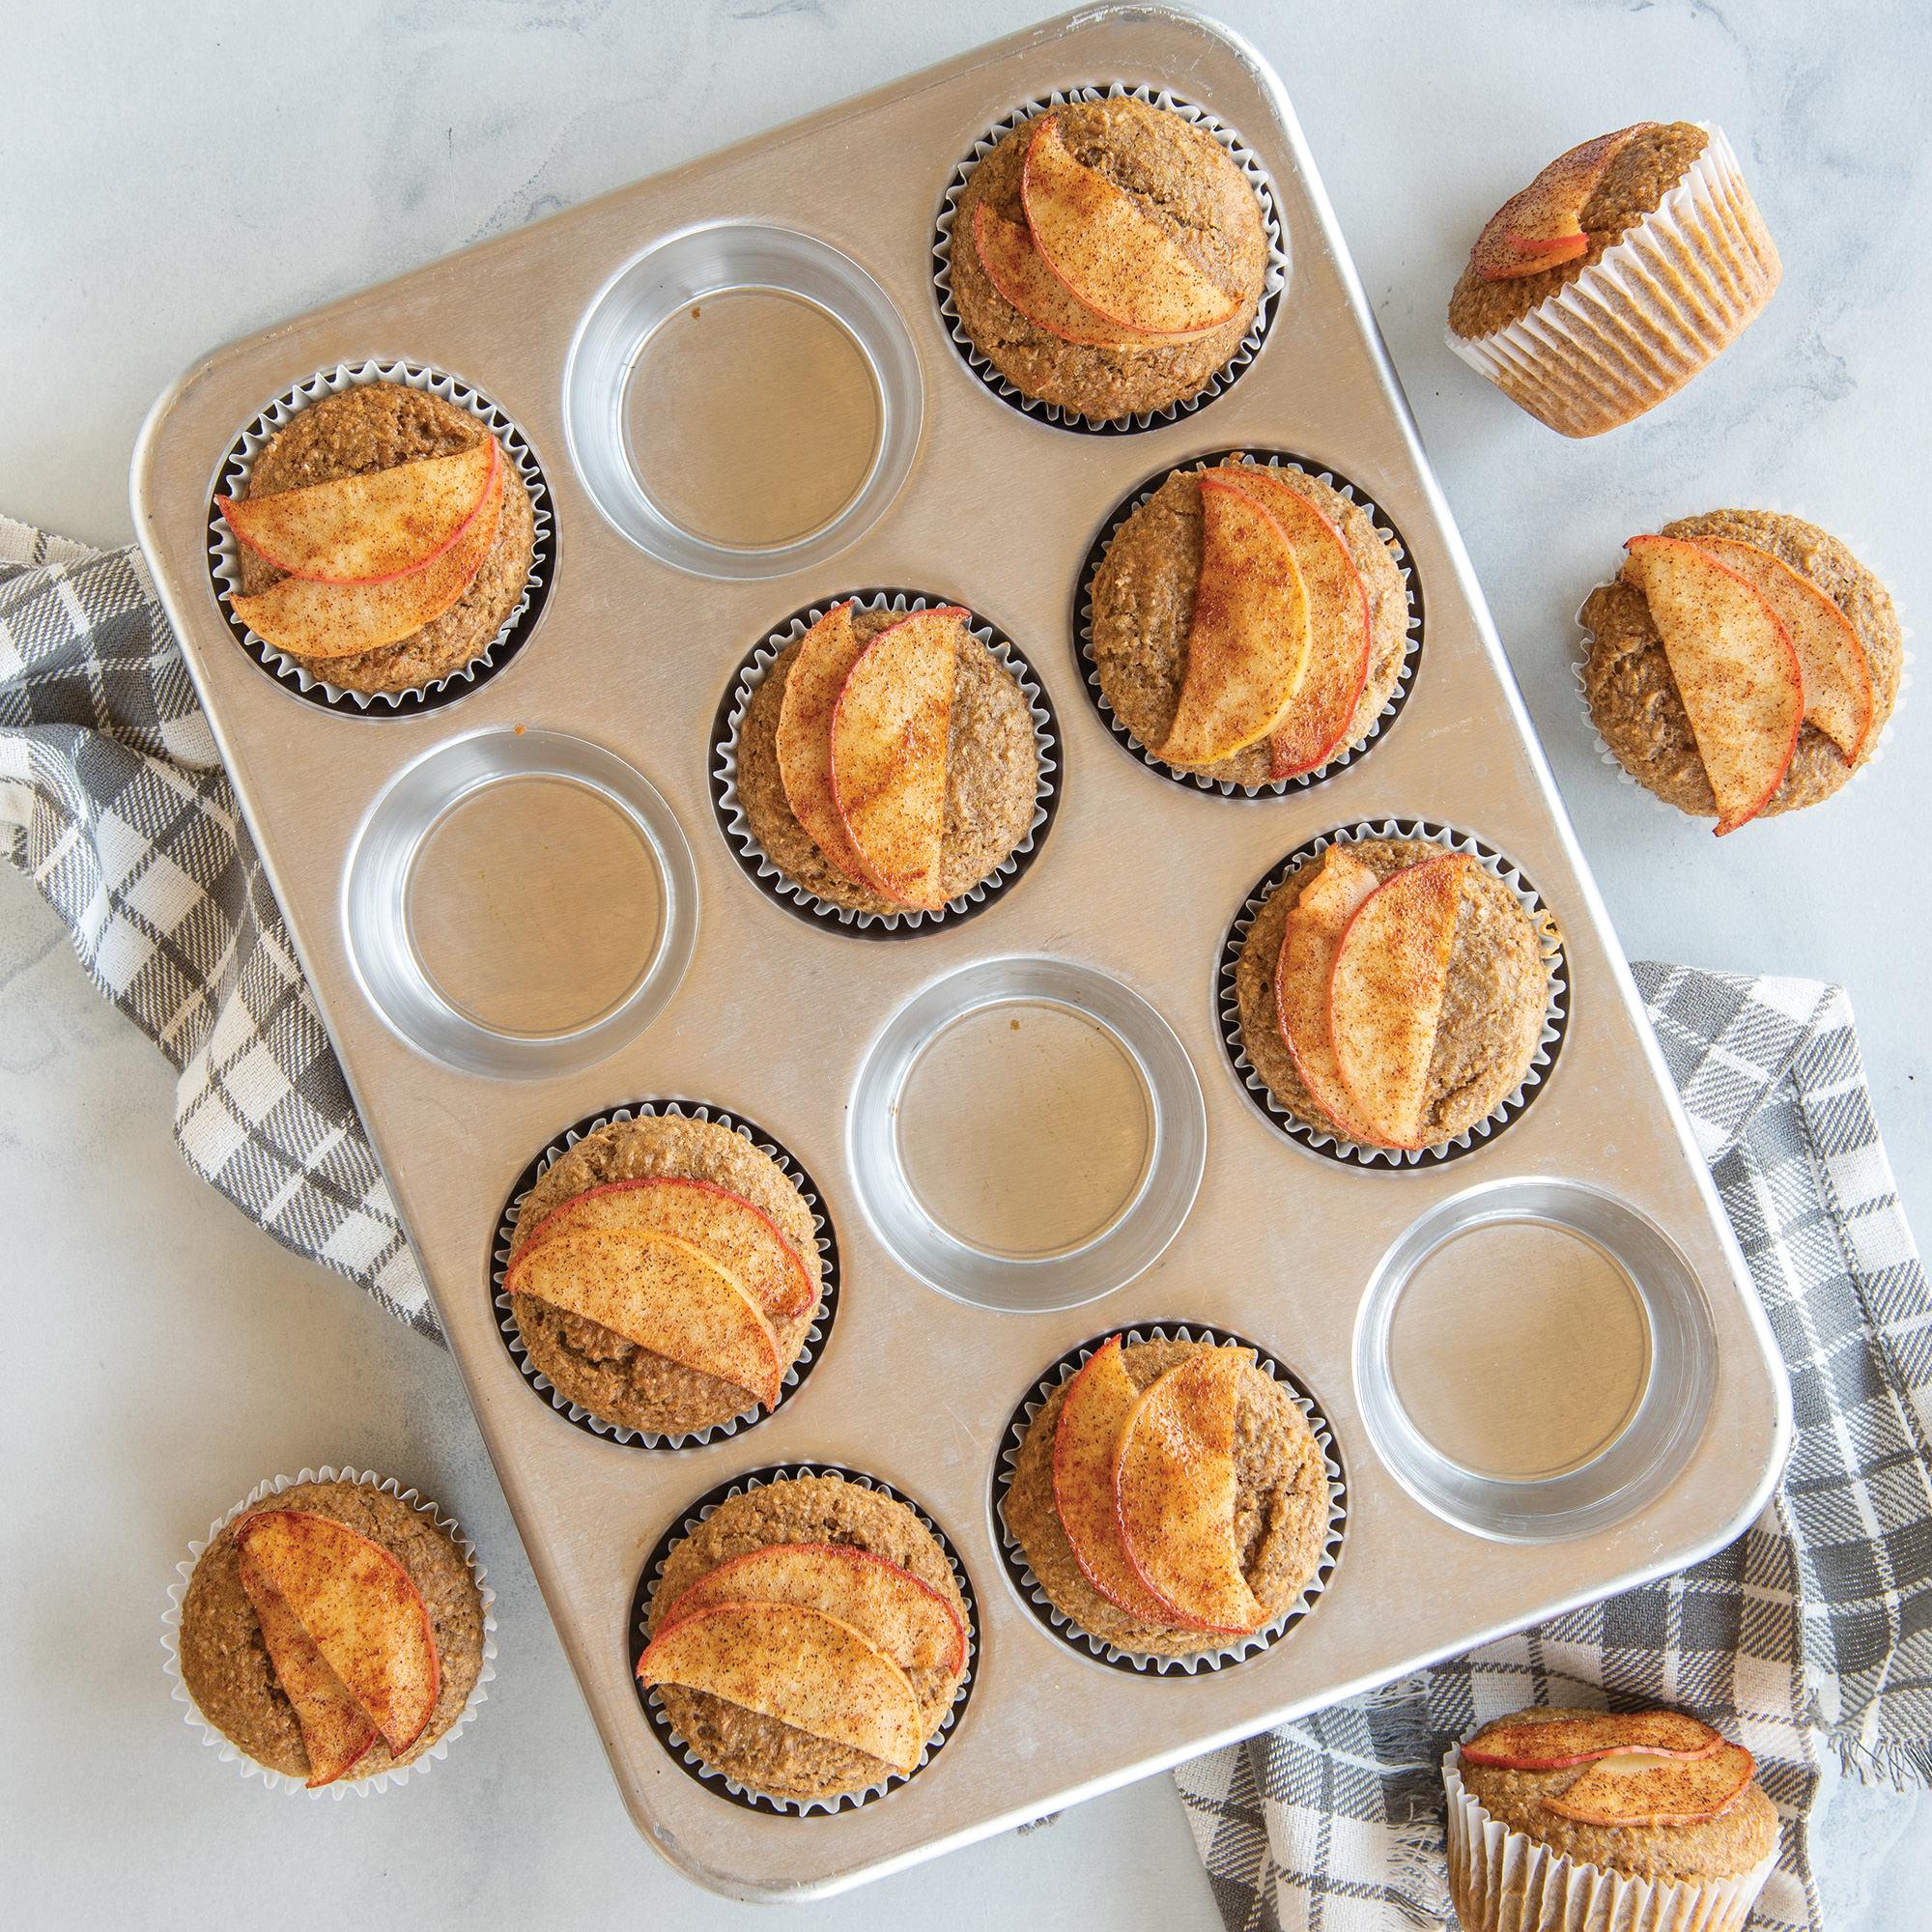 Nordic Ware Naturals Muffin Pan 12 Cup Image 5